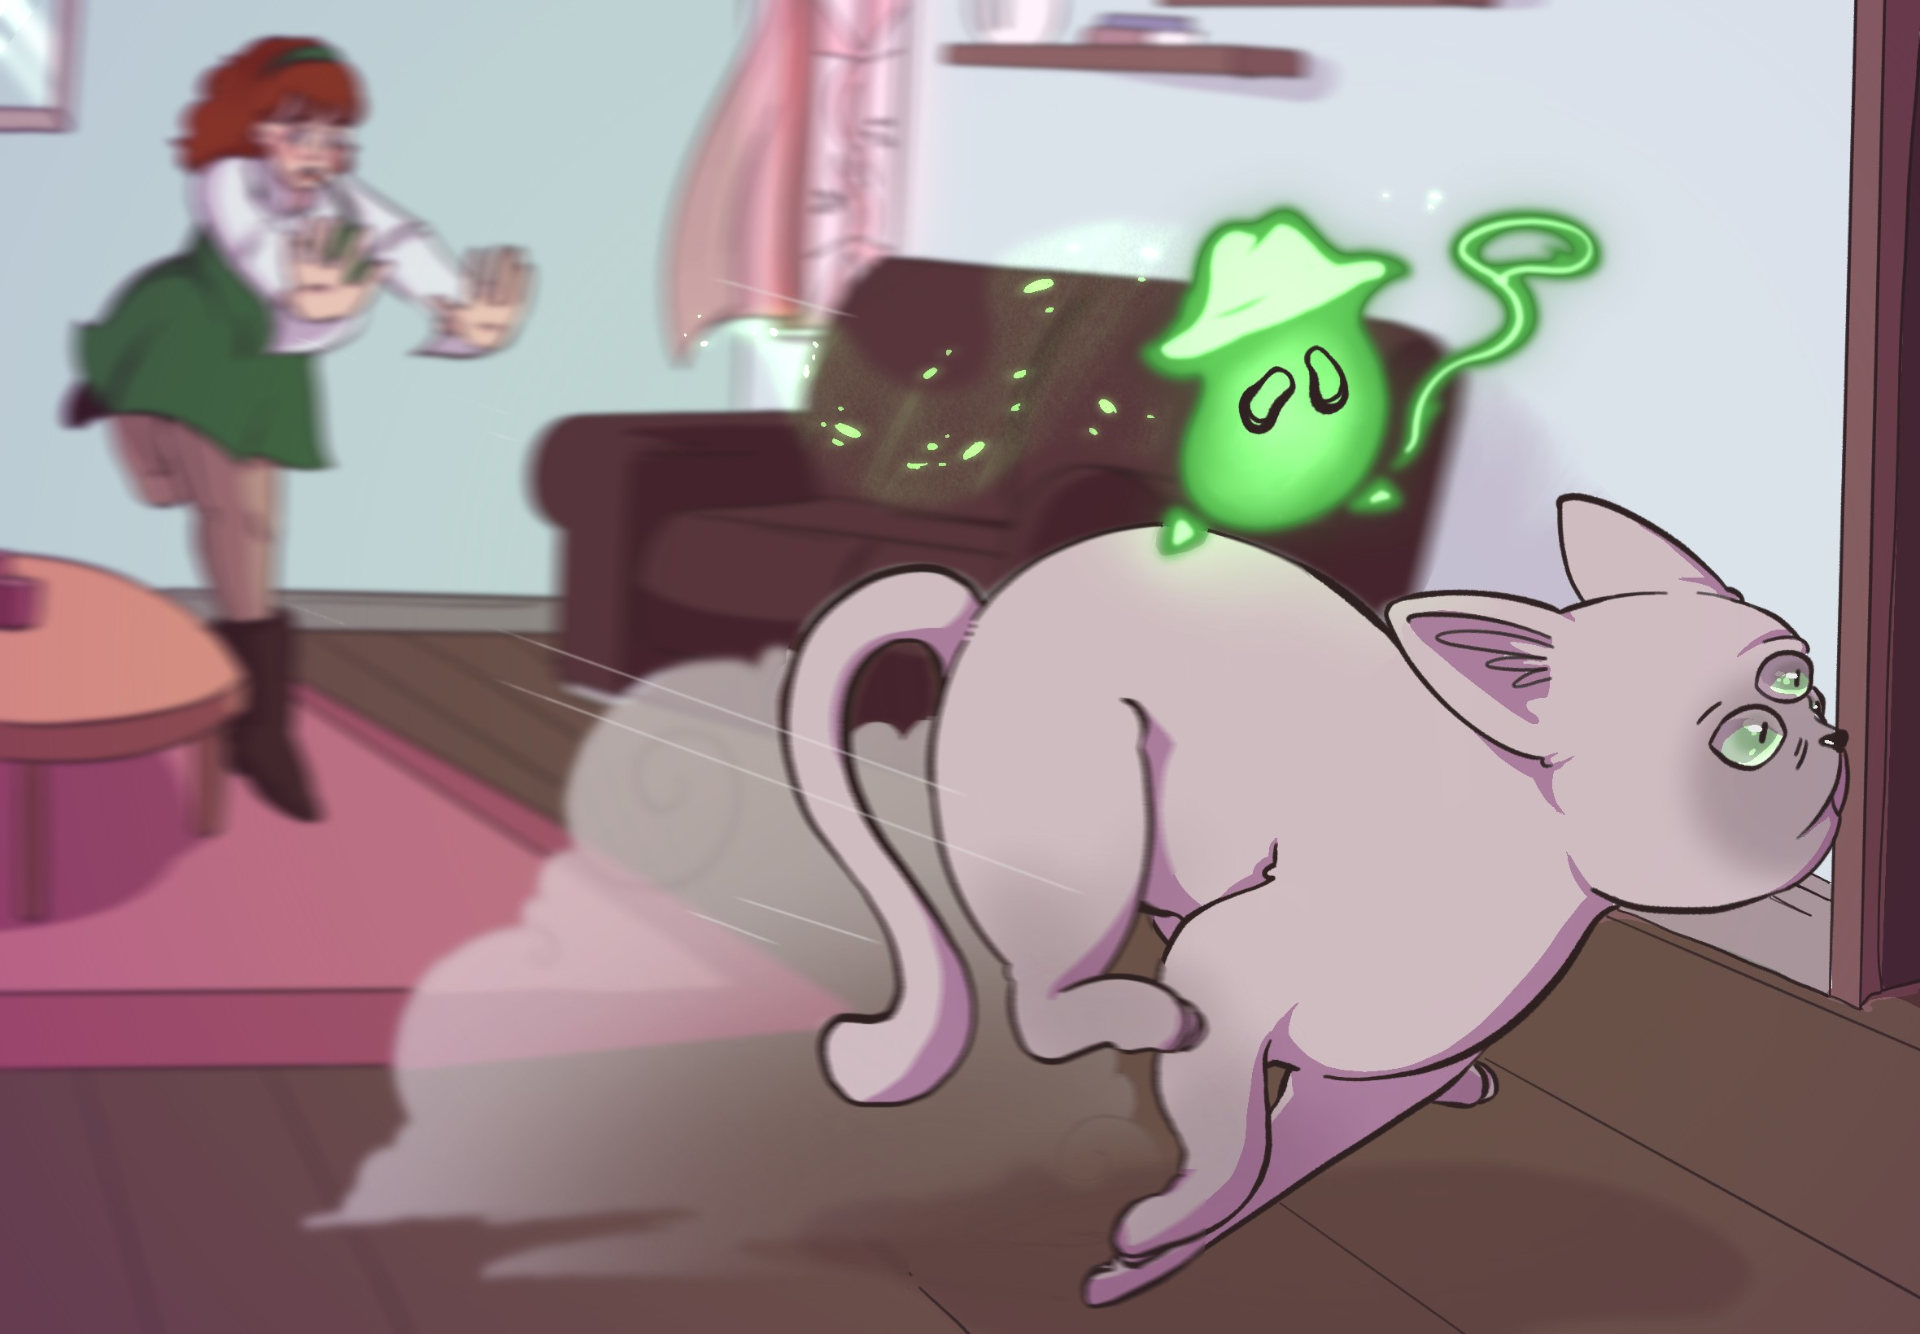 Illustration of woman chasing through lounge after cat being ridden by little green magical creature